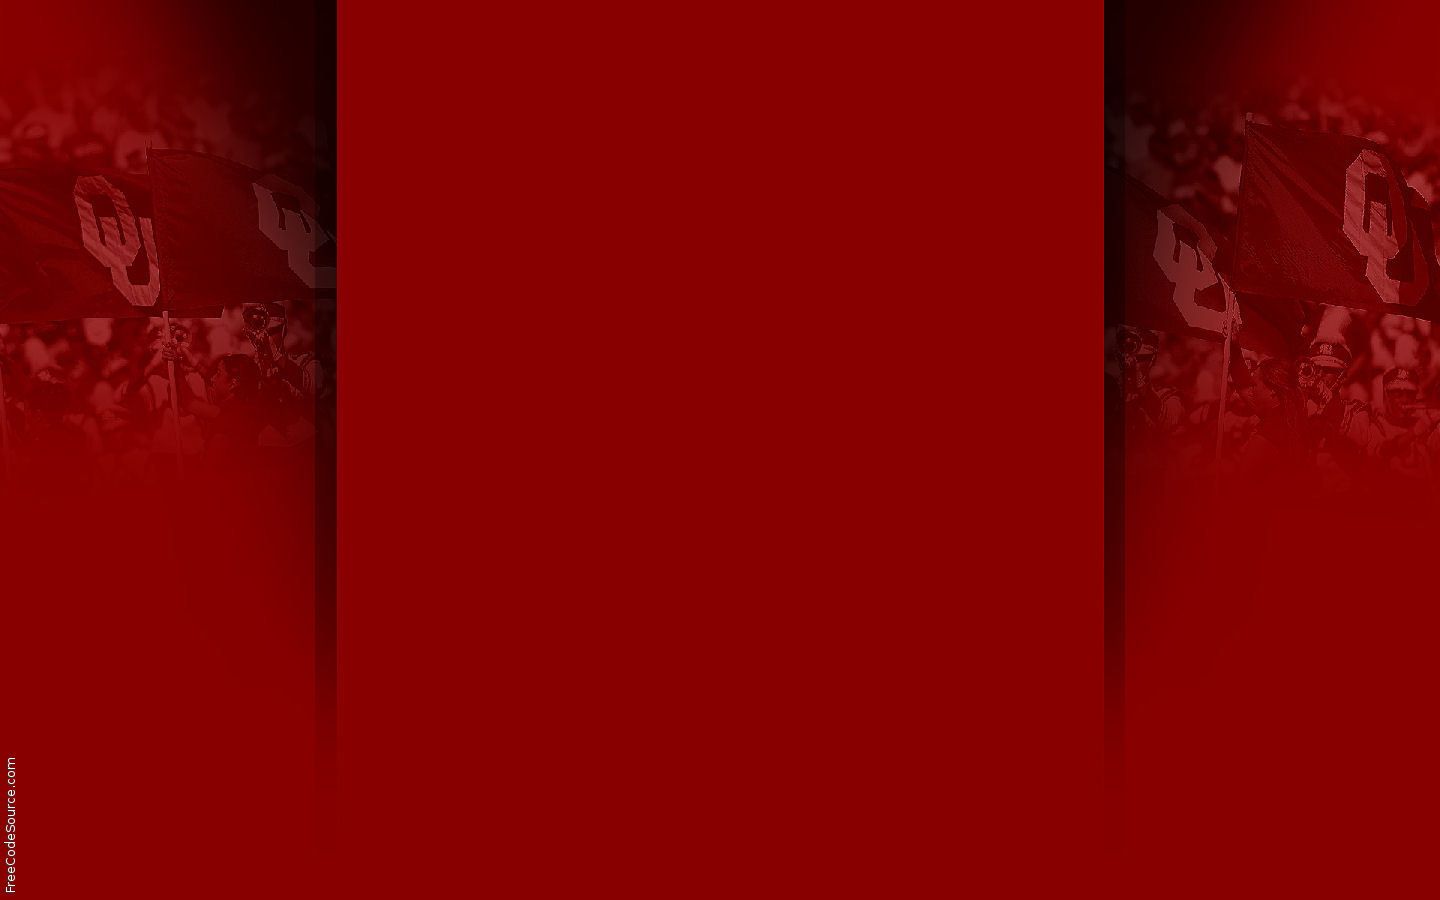 Free Oklahoma University Sooners Backgrounds For PowerPoint